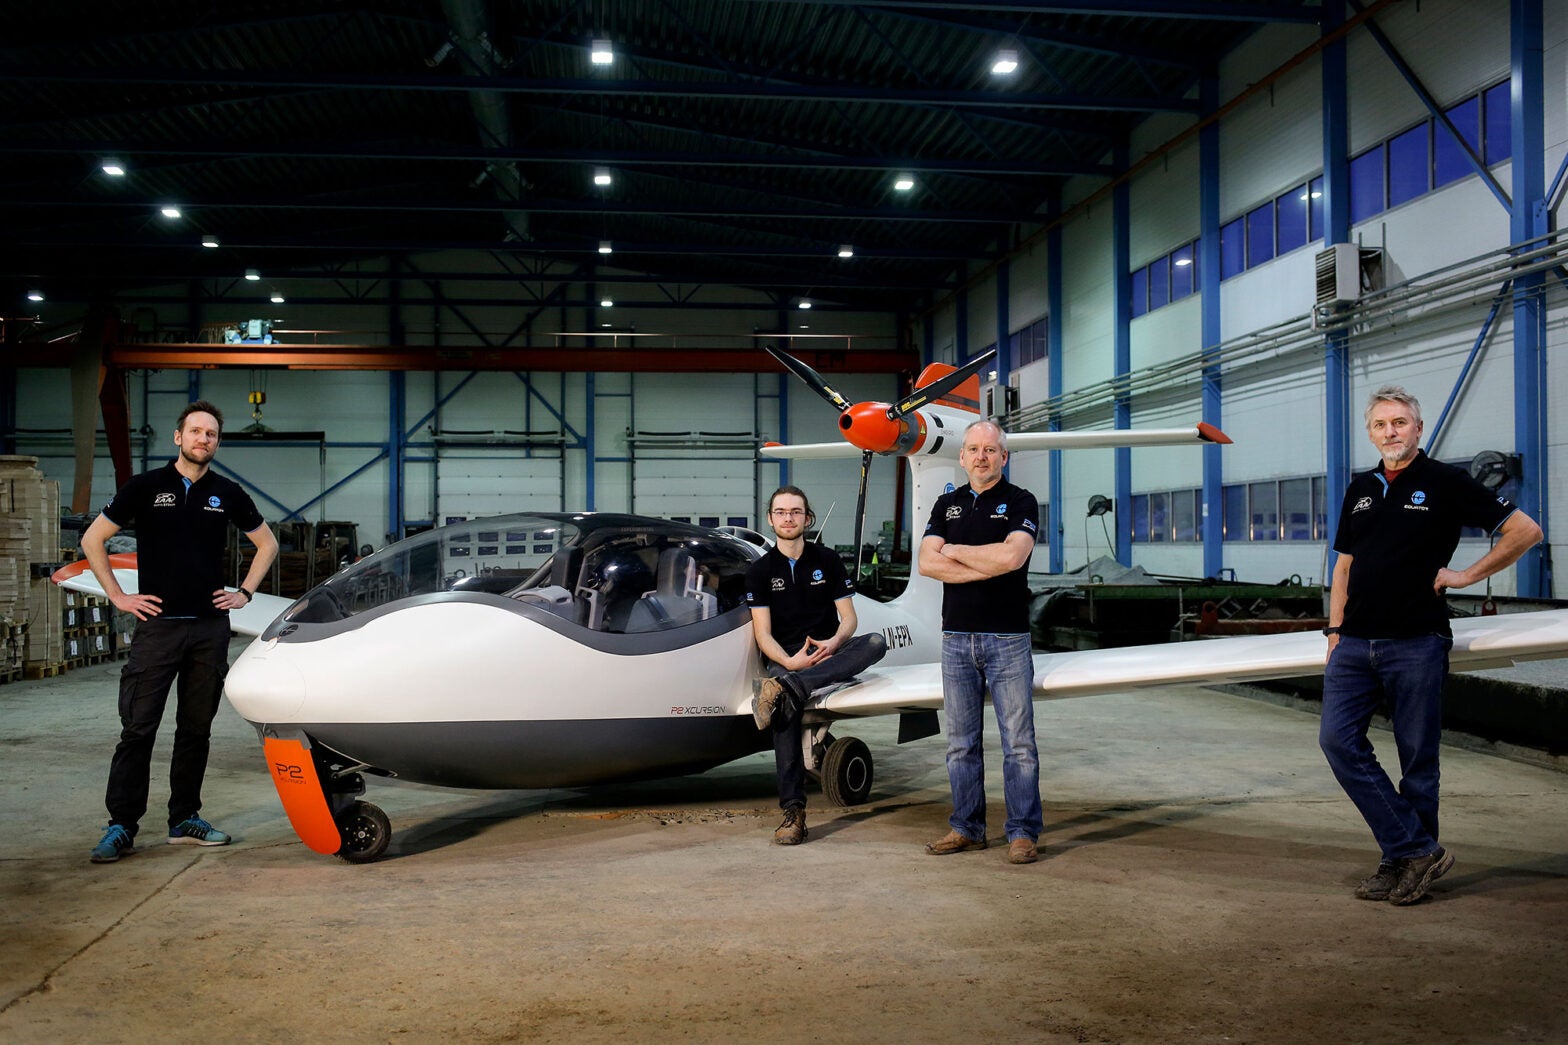 Norway’s Equator Aircraft Joins Air Race E